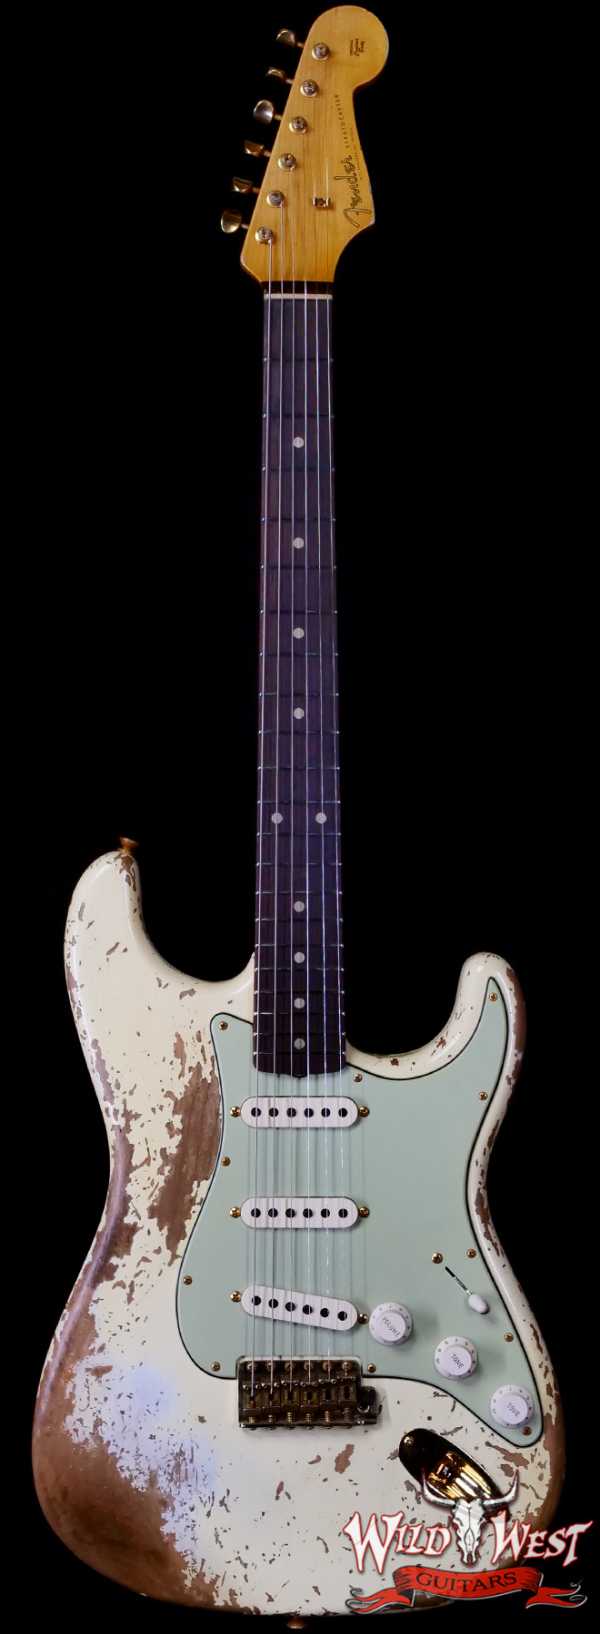 Fender Custom Shop Wild West Guitars 25th Anniversary 1960 Stratocaster Madagascar Rosewood Fretboard Heavy Relic Vintage White 7.80 LBS